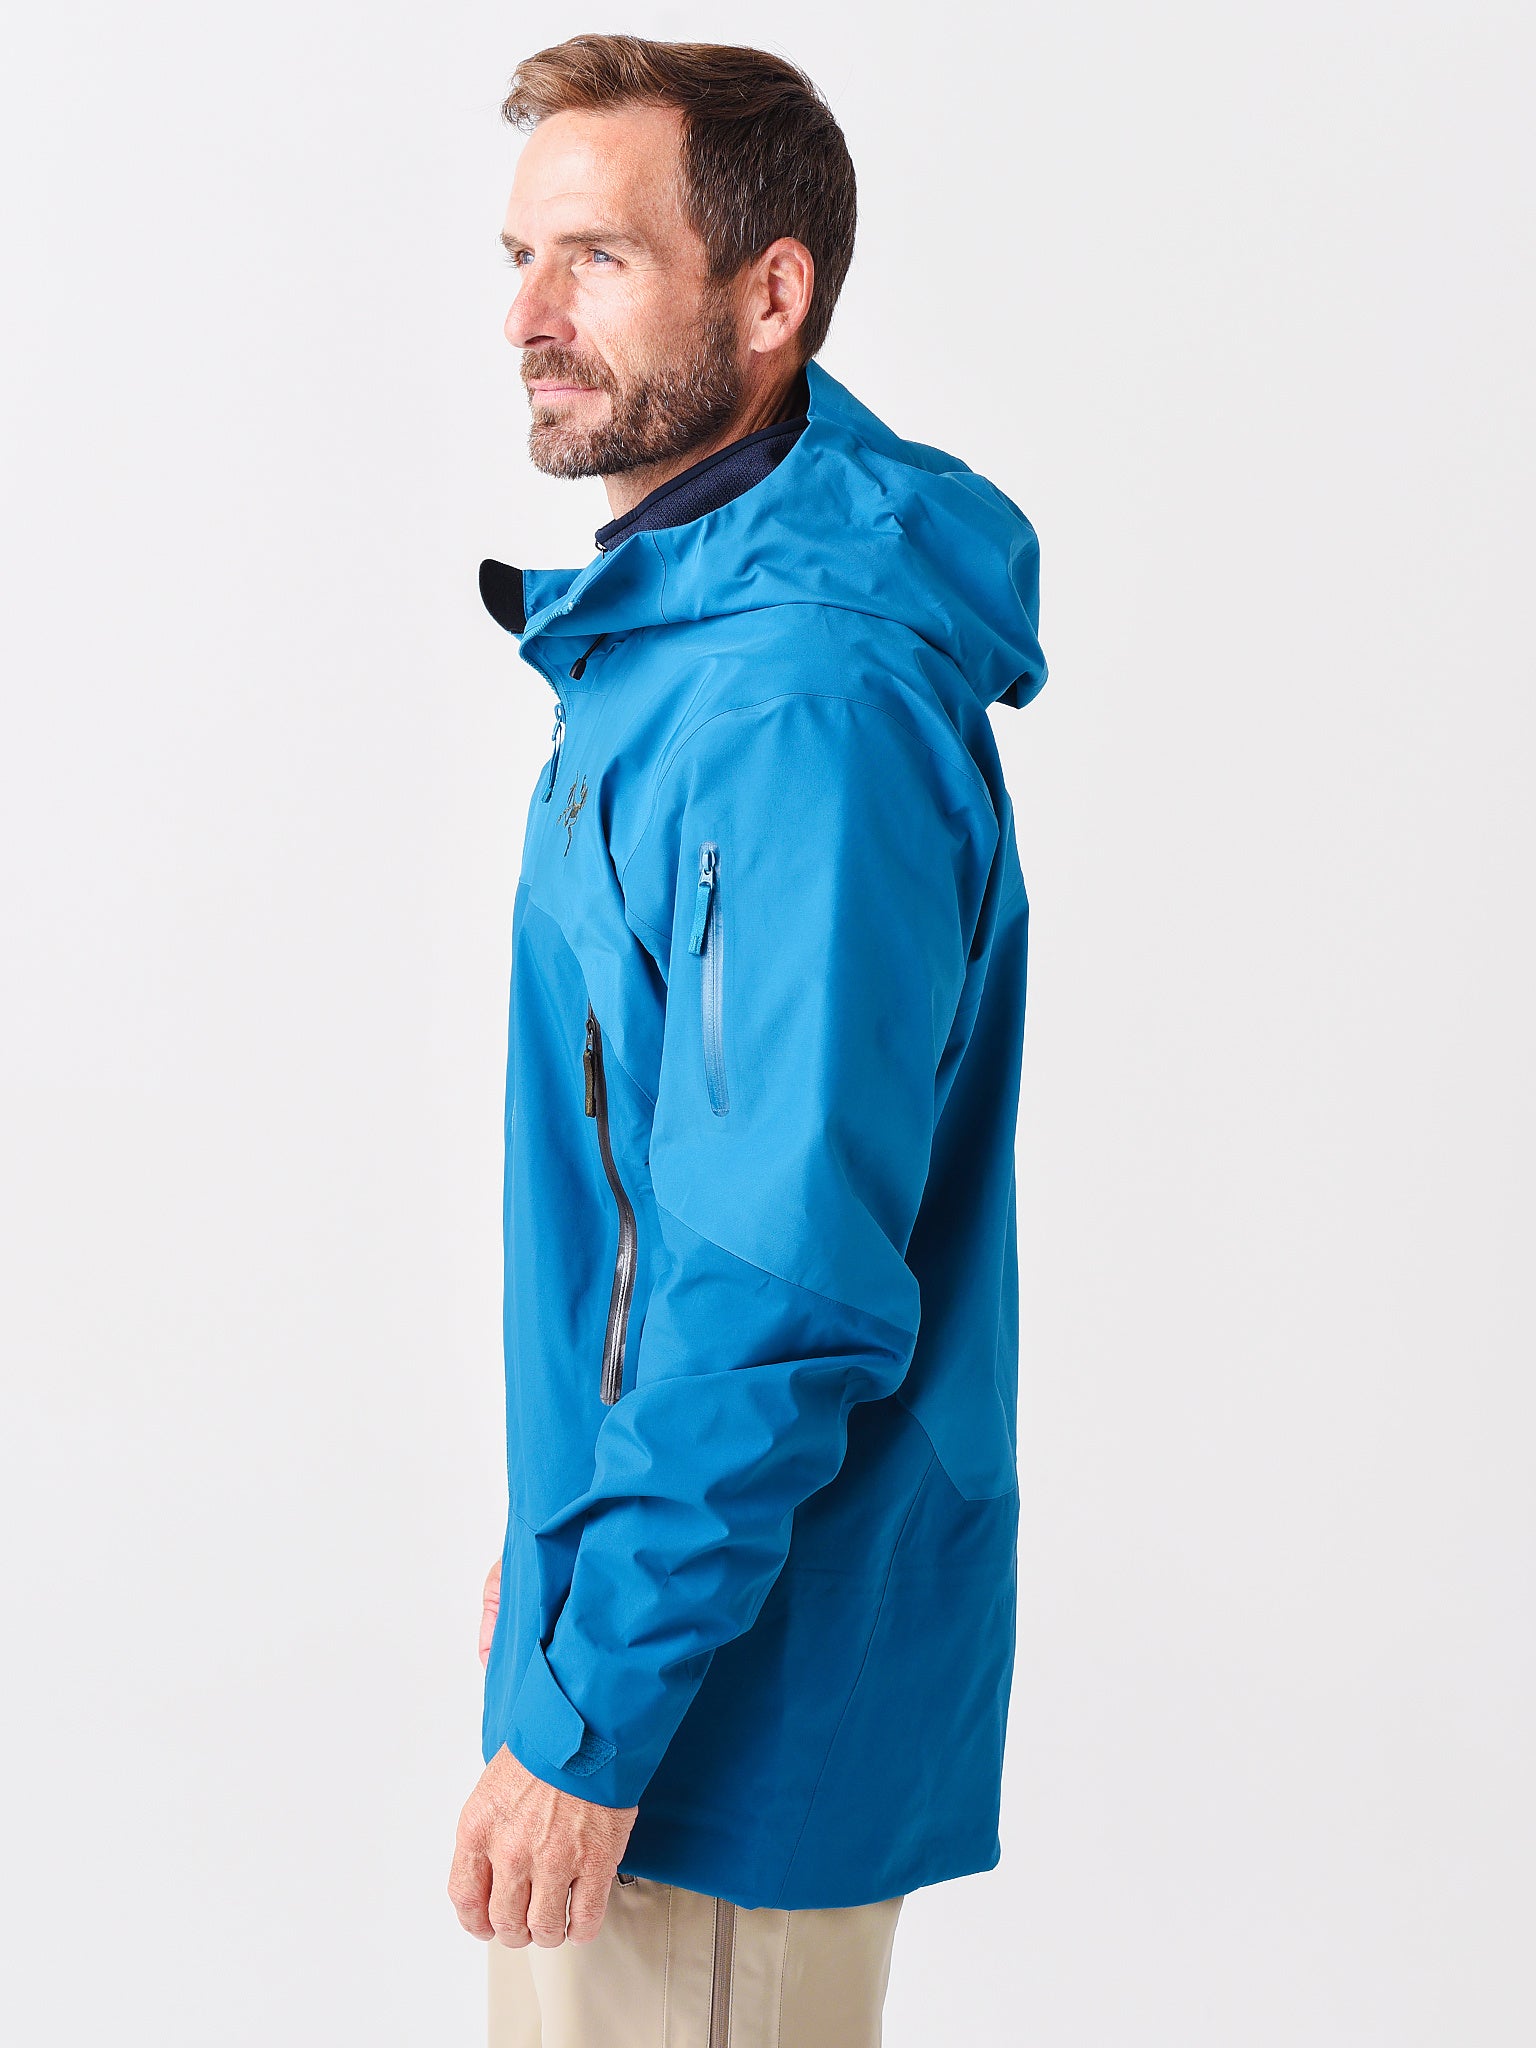 Arc'teryx Men's Sabre Jacket Review: For the Serious Skier